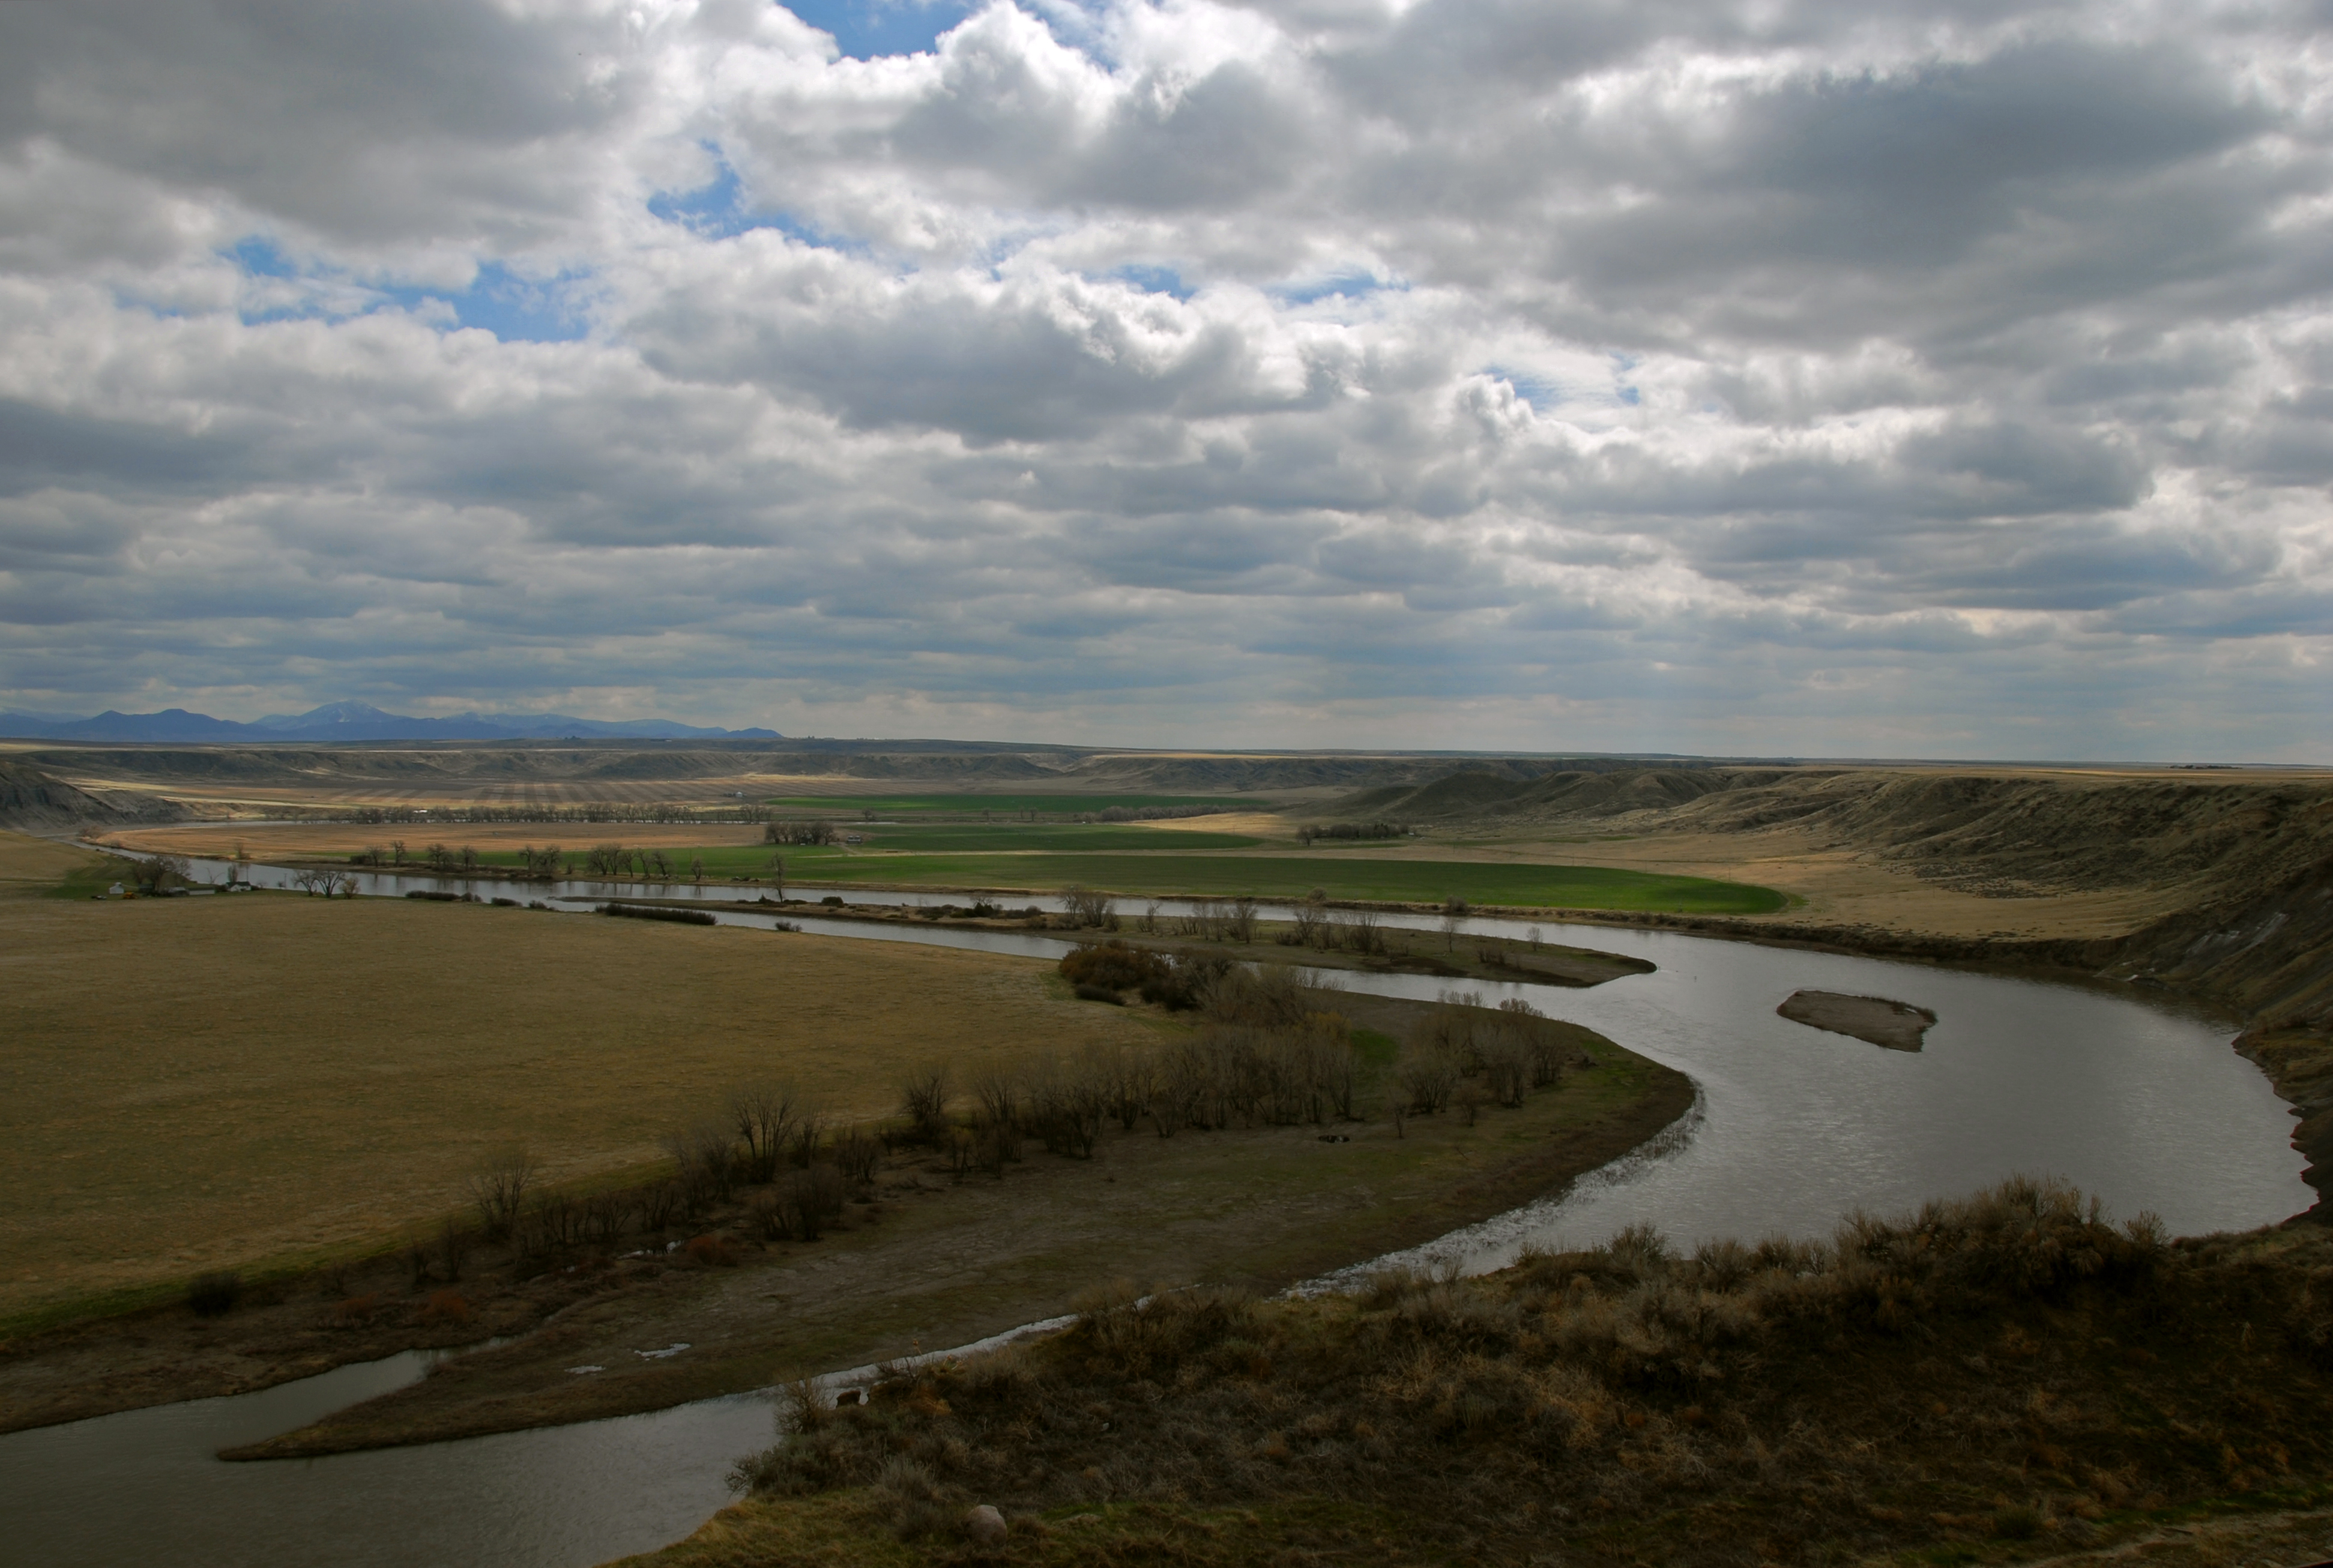 Just around this corner of the Missouri River sits Fort Benton, the oldest town in Montana, founded in 1846. 